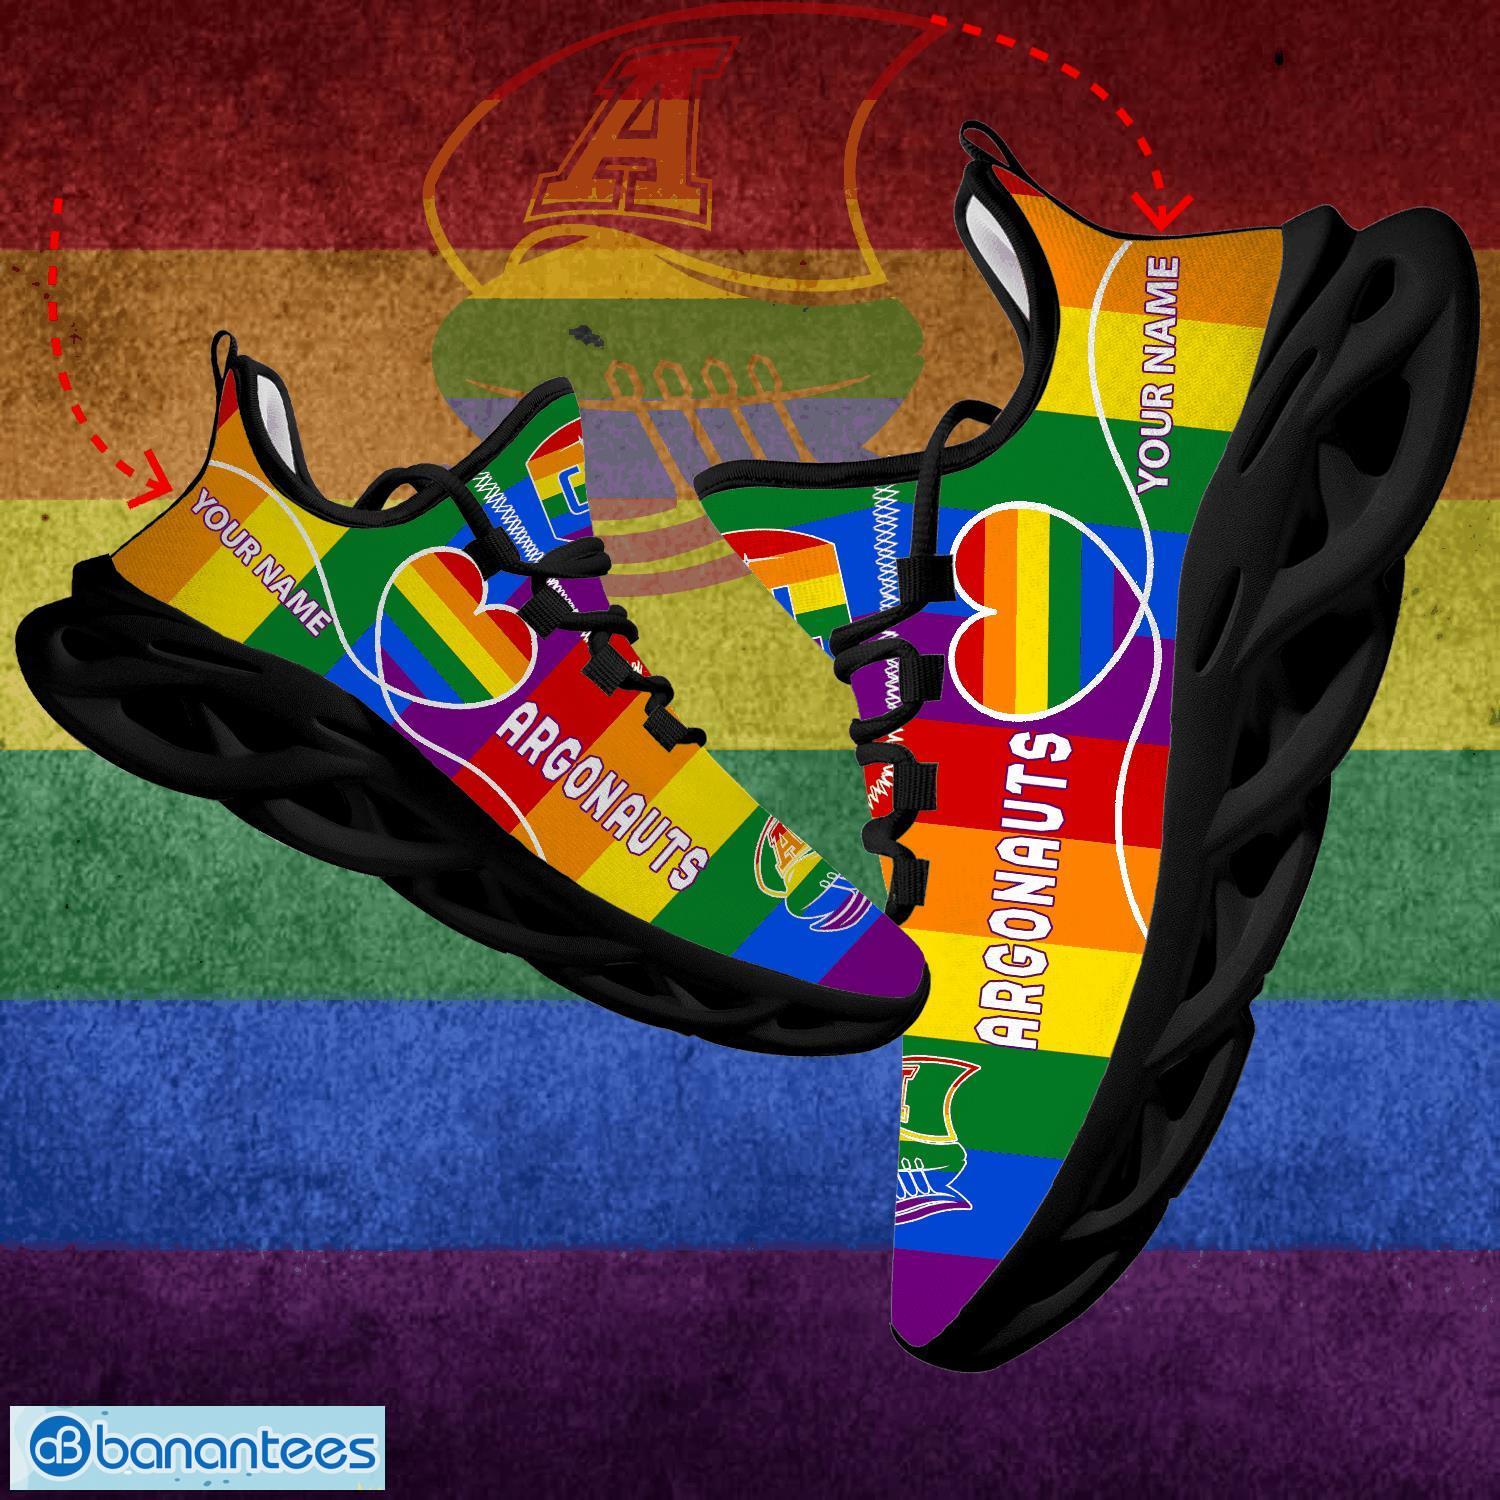 Rainbow LGBT Love CFL Toronto Argonauts Max Soul Shoes Personalized Gift For LGBT Sports Sneakers - Rainbow LGBT Love CFL Toronto Argonauts Max Soul Shoes Personalized Photo 1